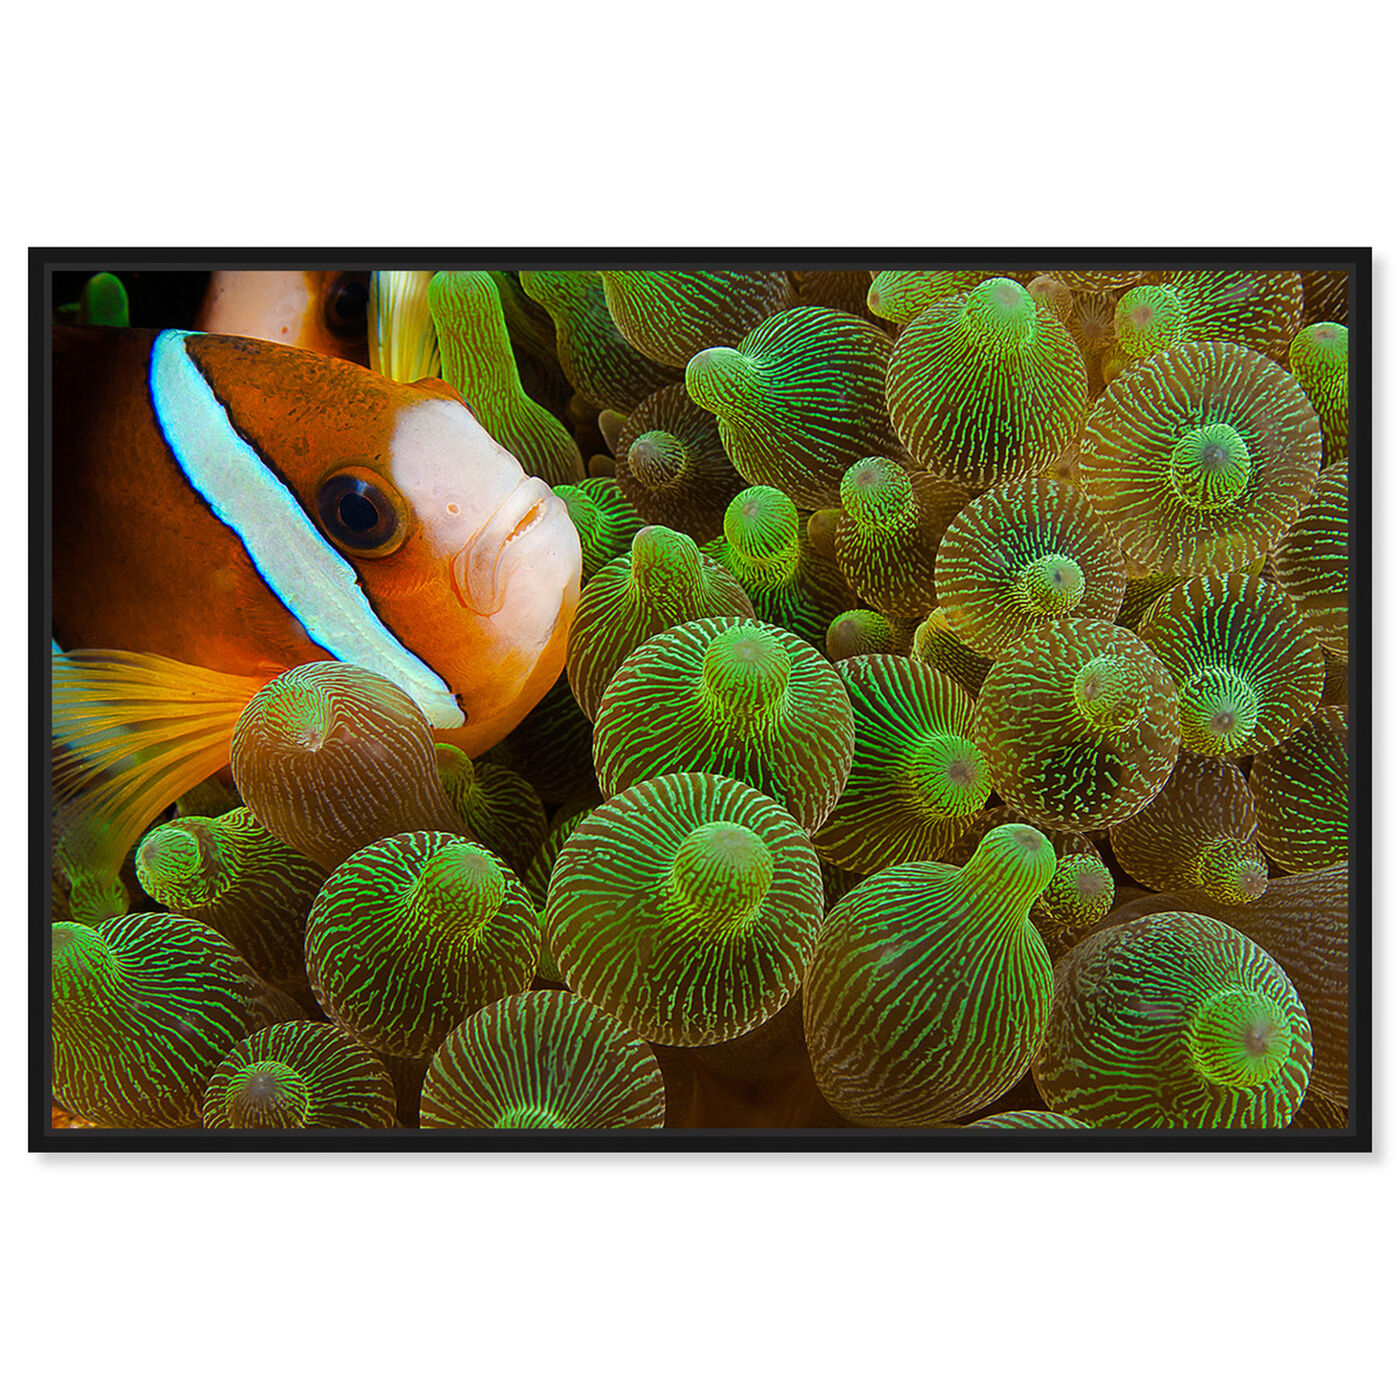 Front view of Clarks Anemonefish by David Fleetham featuring nautical and coastal and marine life art.